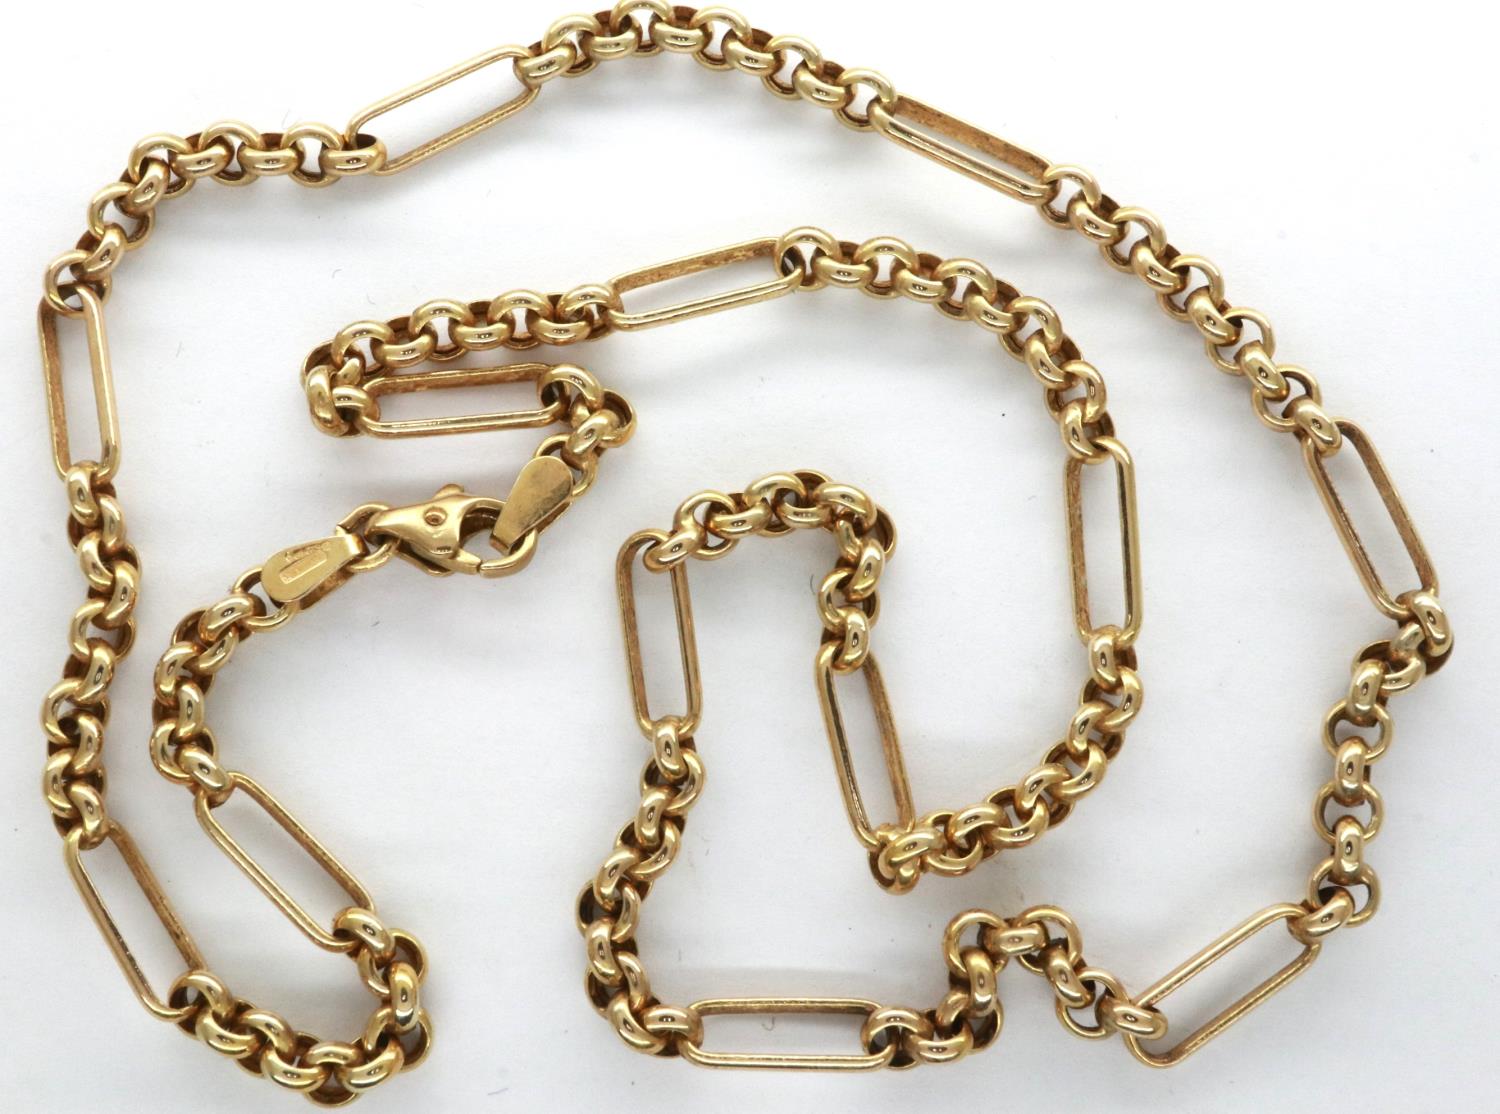 9ct gold trombone neck chain, L: 46 cm, 3.4g. P&P Group 1 (£14+VAT for the first lot and £1+VAT